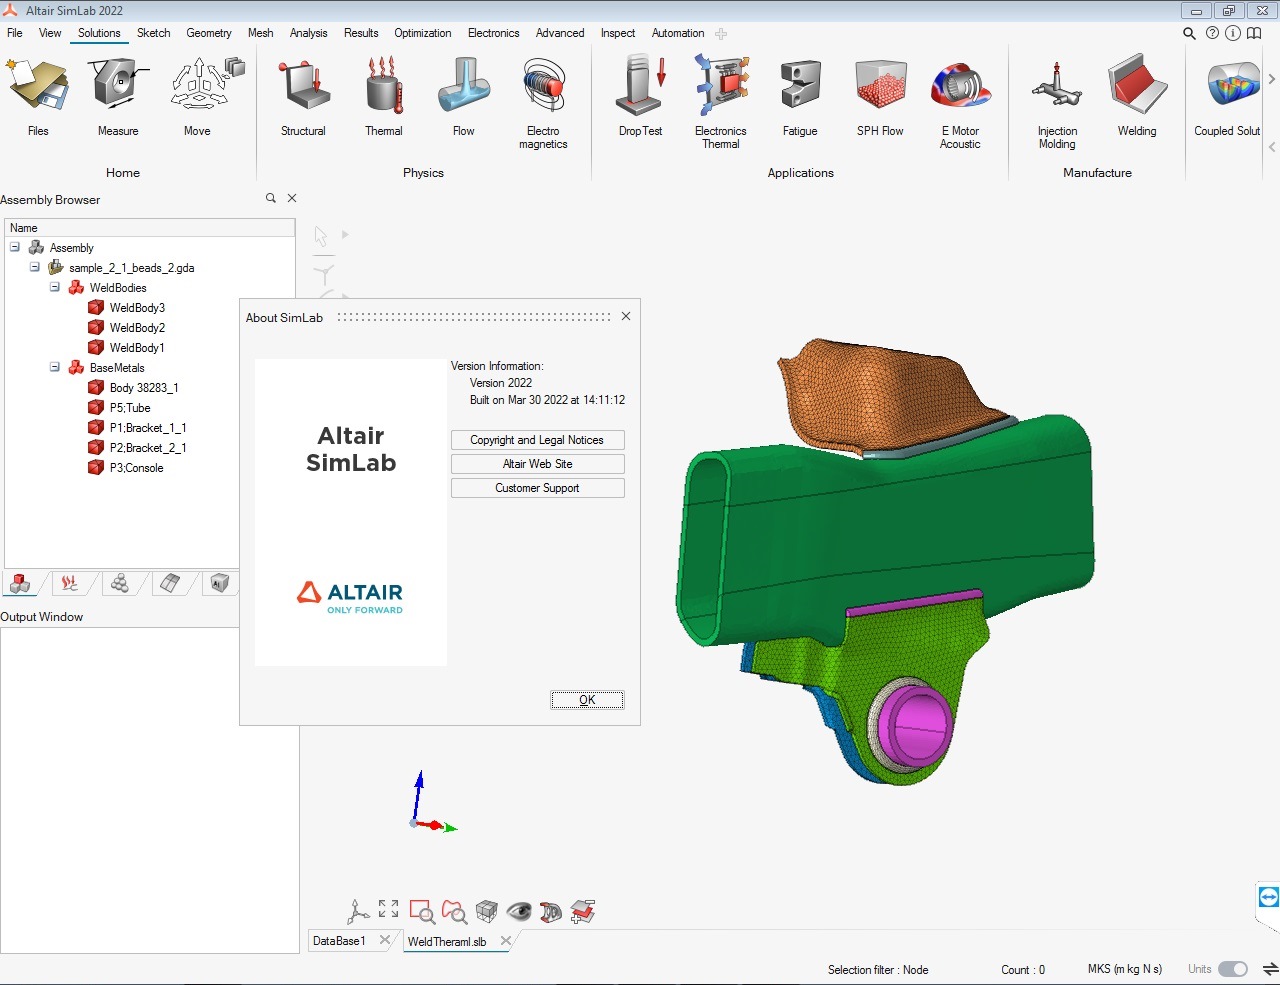 Working with Altair SimLab 2022.0 full